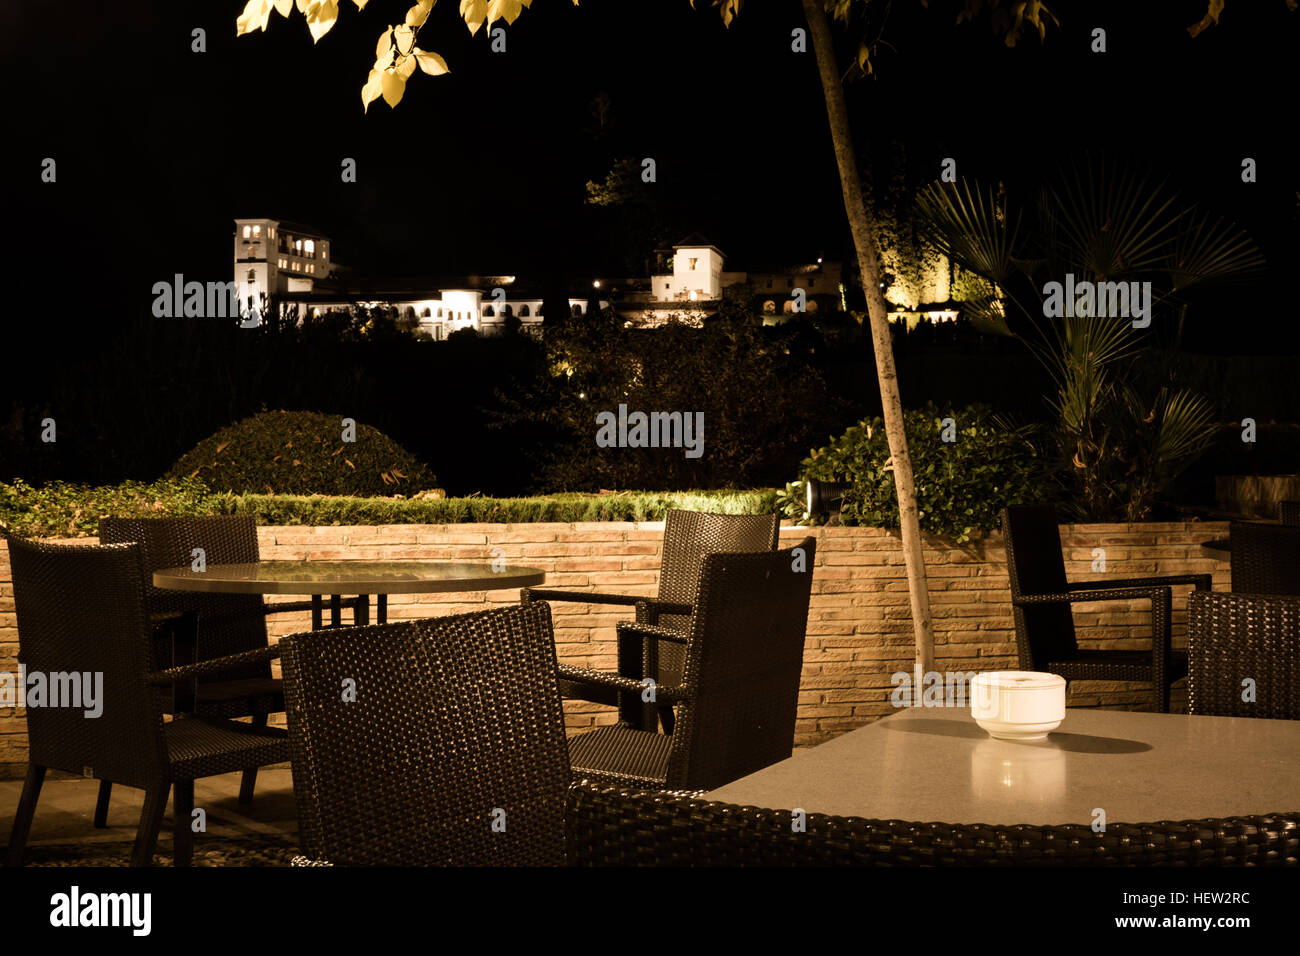 Ancient building seen from an empty terrace of a restaurant at night Stock Photo